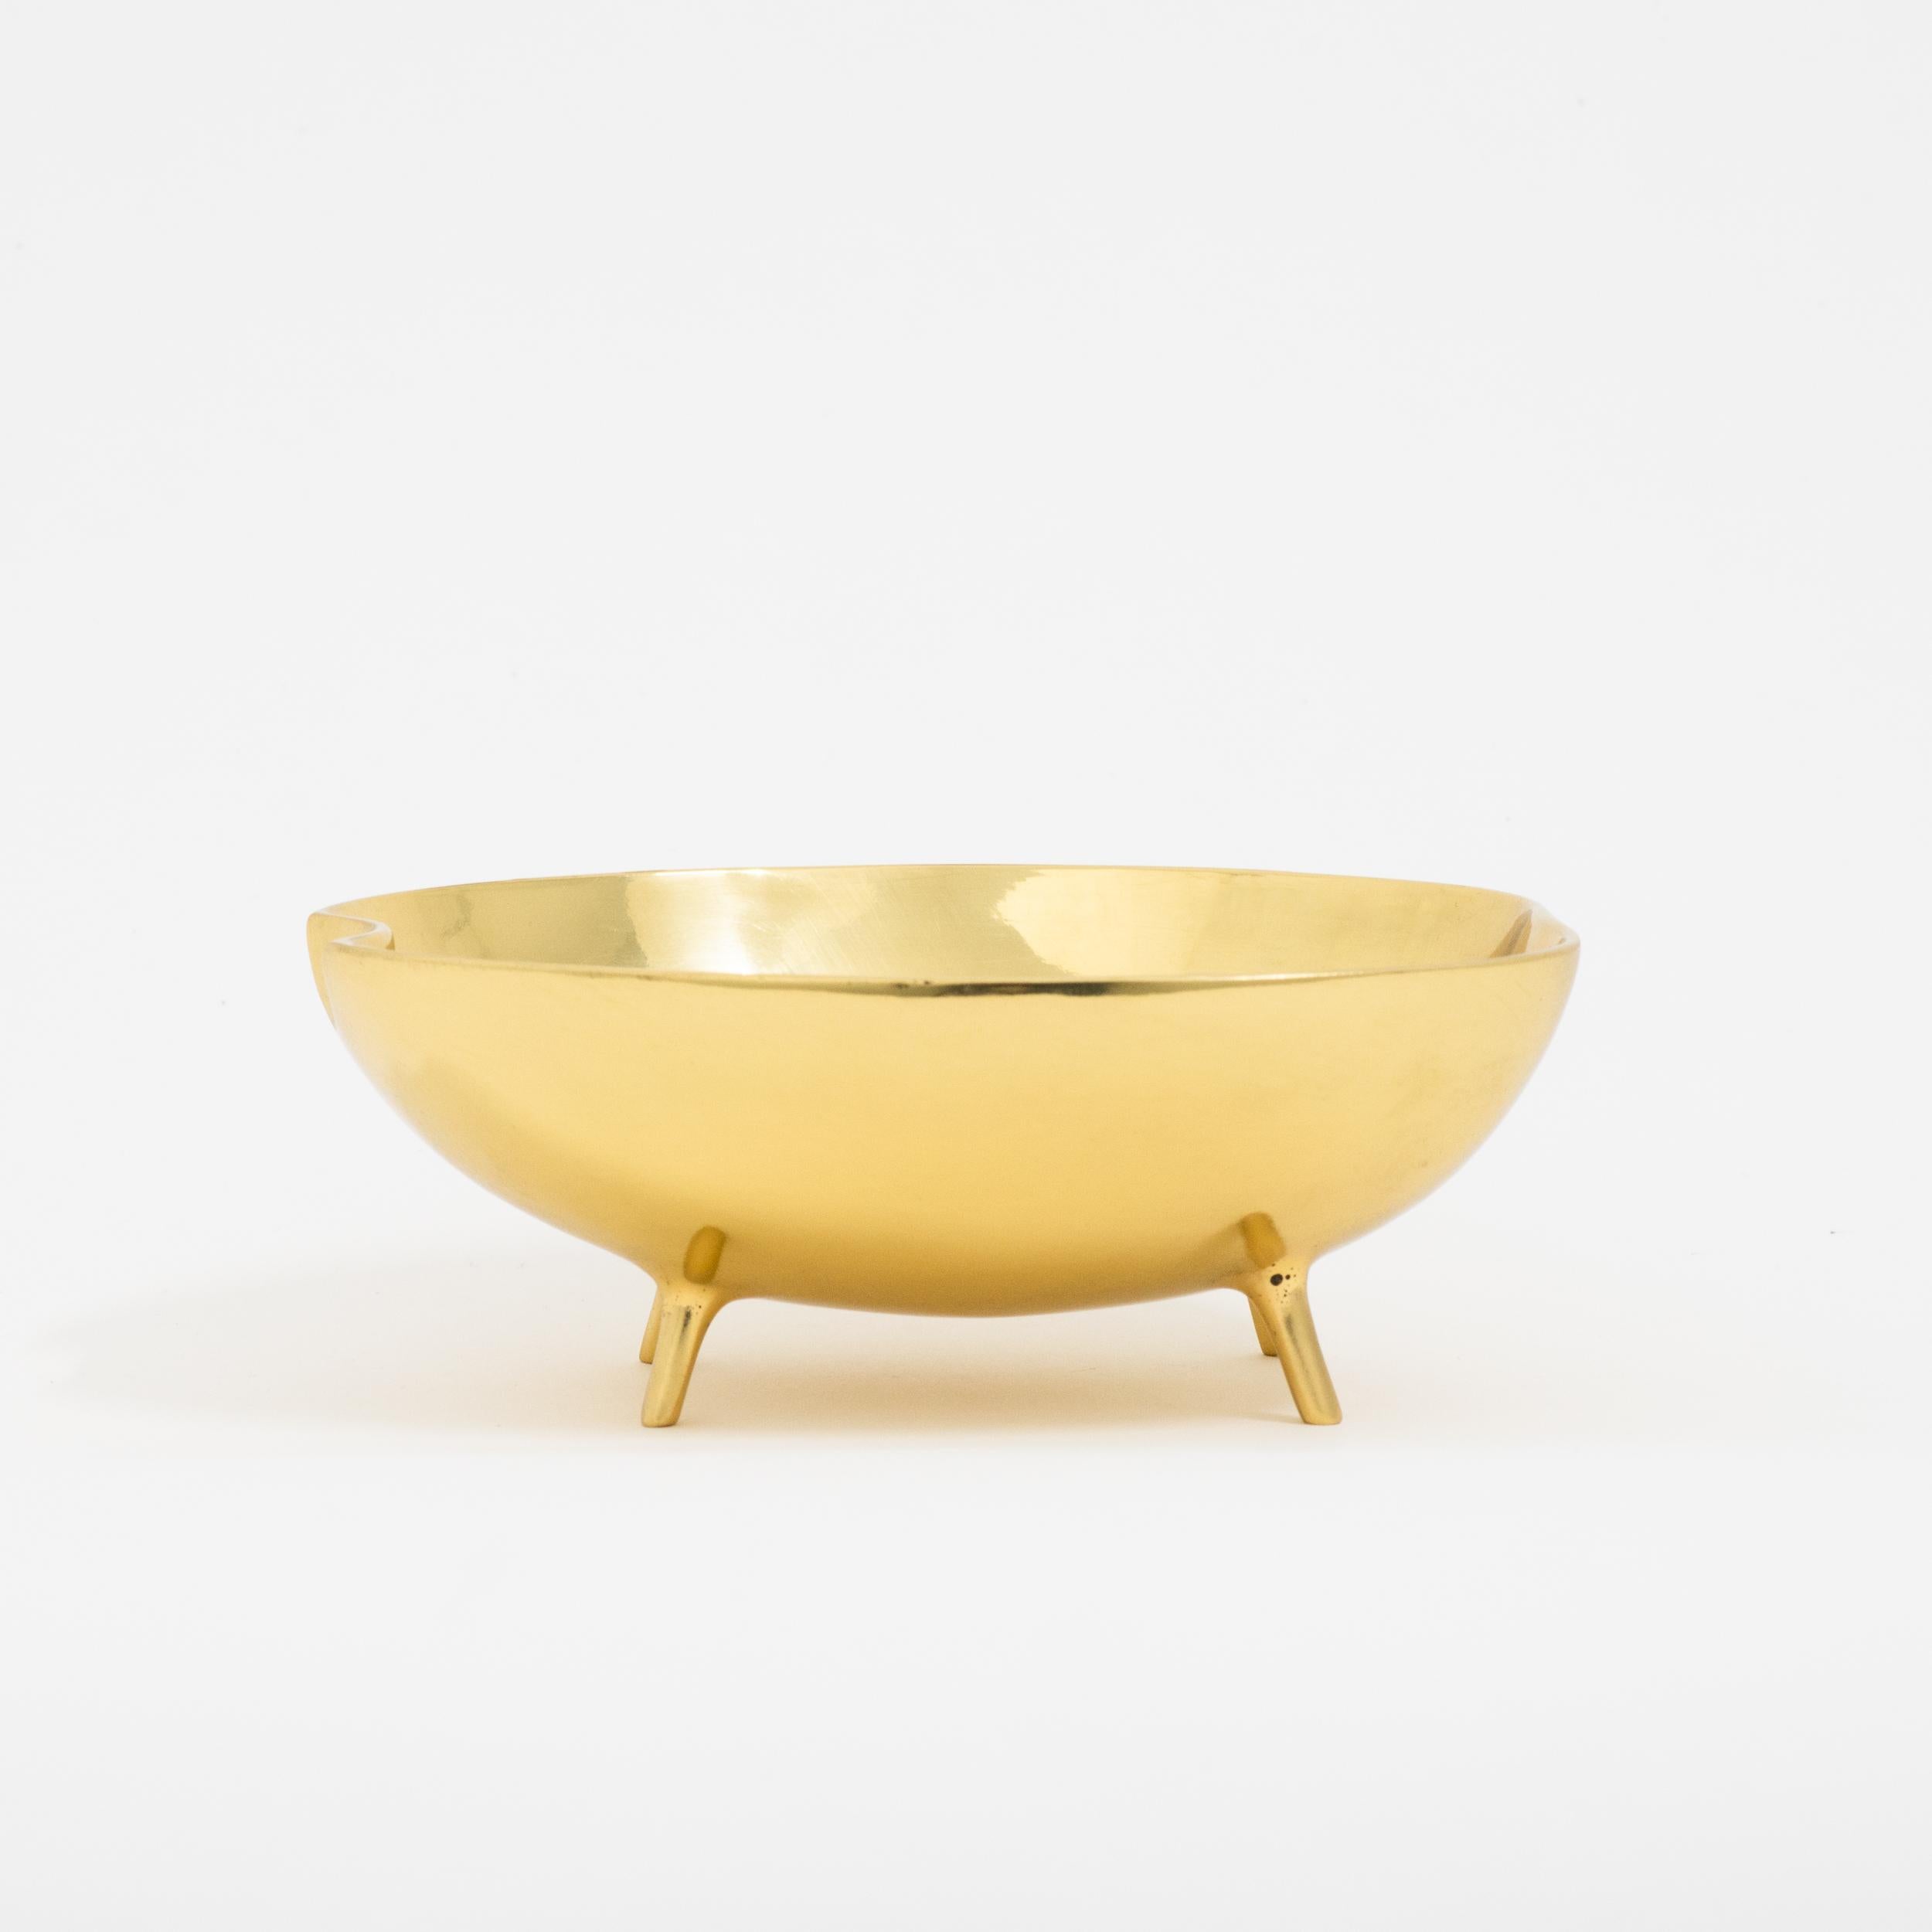 Organic Modern Polished Brass Decorative Bowl Vide-poche with Legs For Sale